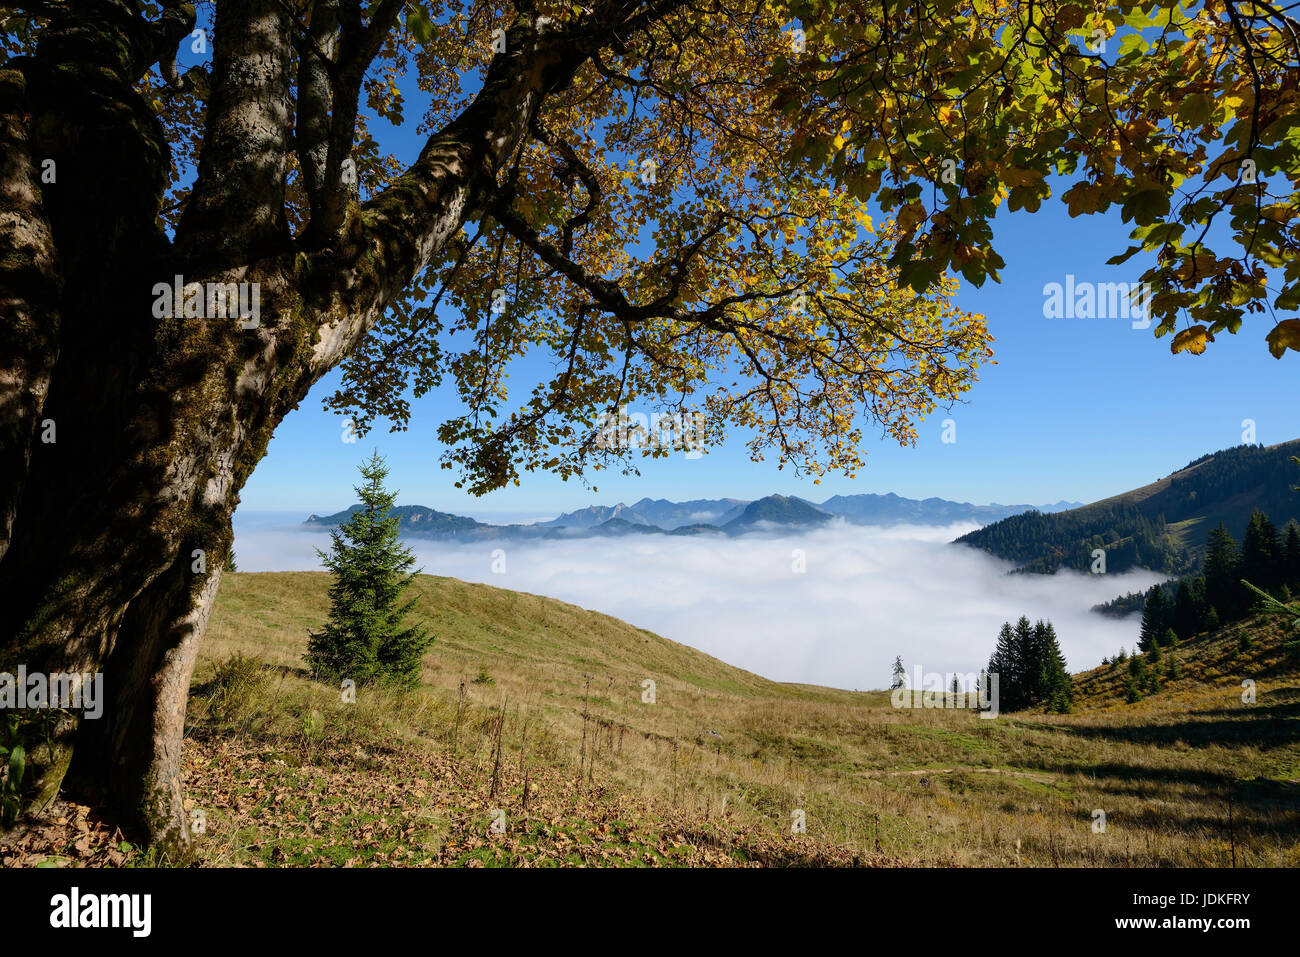 Sycamore with autumn colouring in the mountains, Berg-Ahorn mit Herbstfärbung im Gebirge Stock Photo